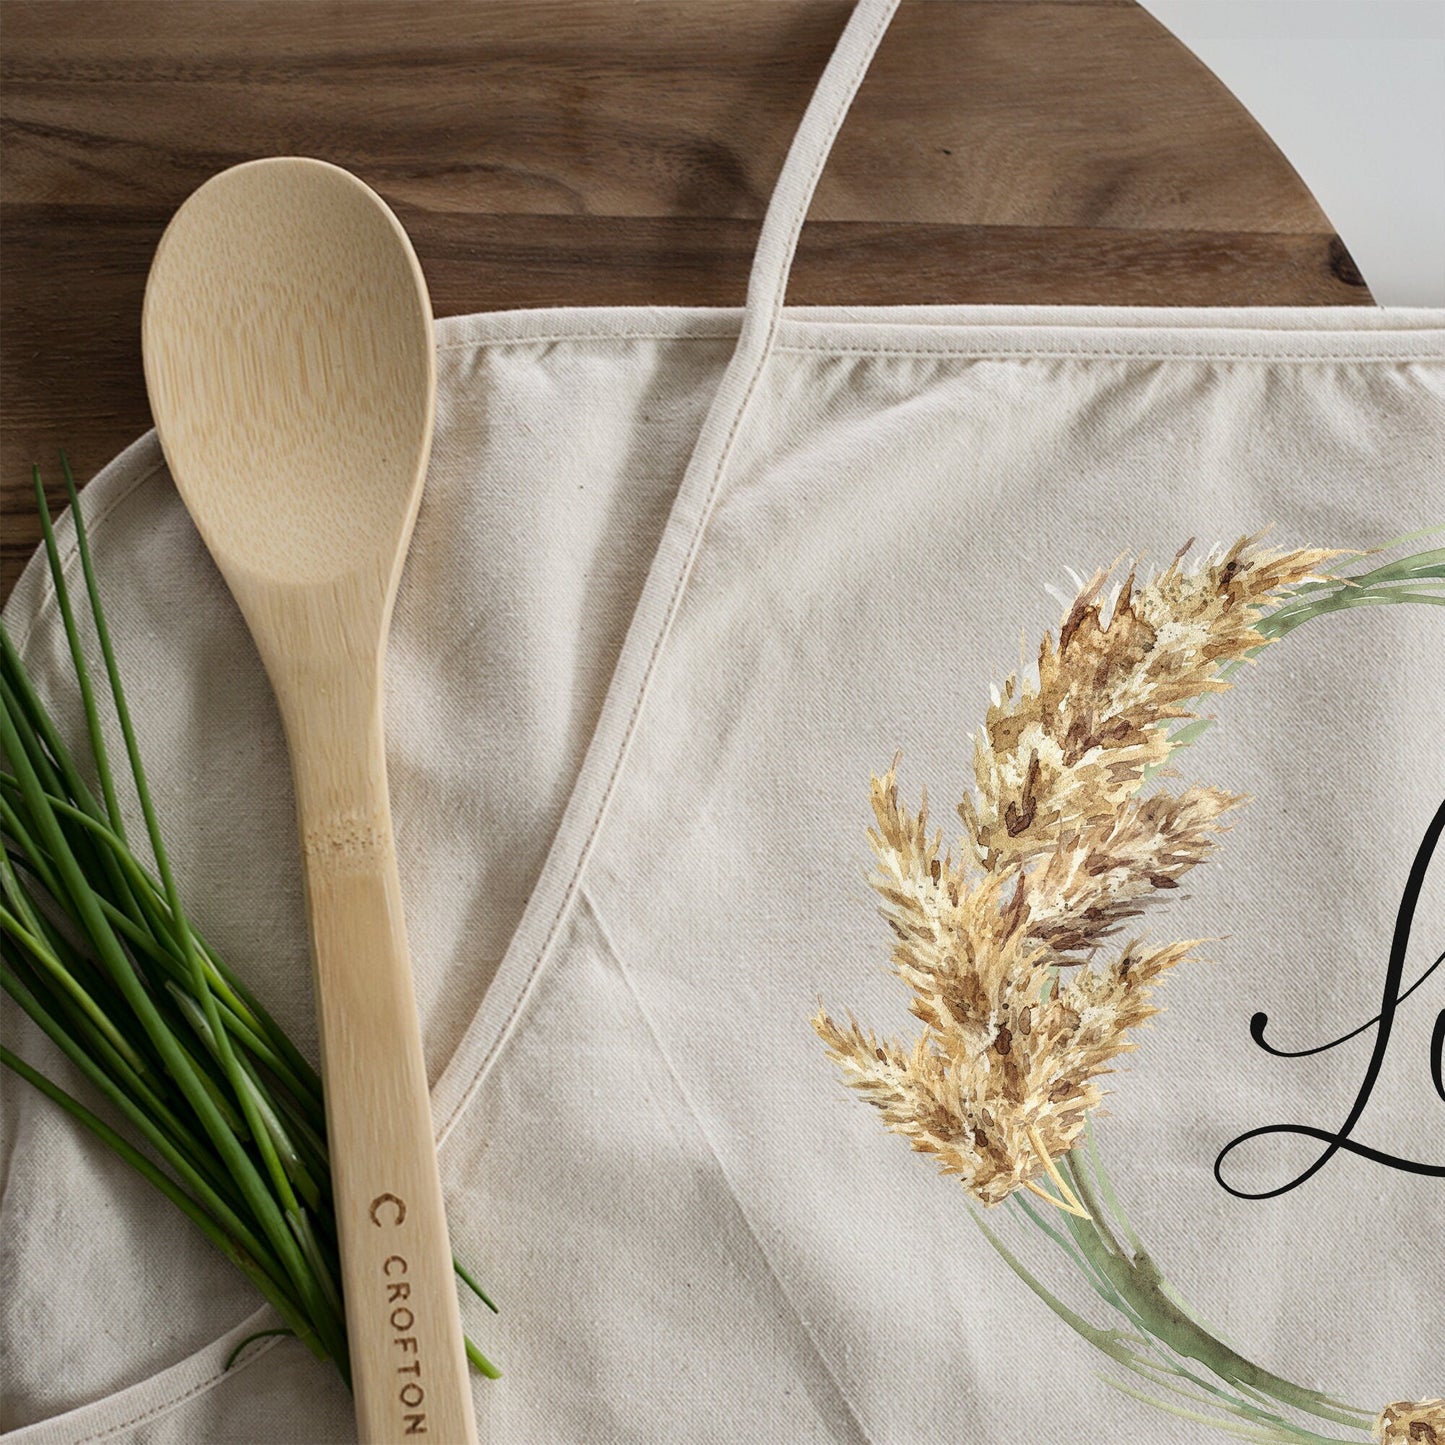 Bridesmaid Pampas Grass Gift | Personalized Apron | Kitchen Apron | Personalized Bridesmaid Gift | Custom Apron Gift | Bridal Party Gift